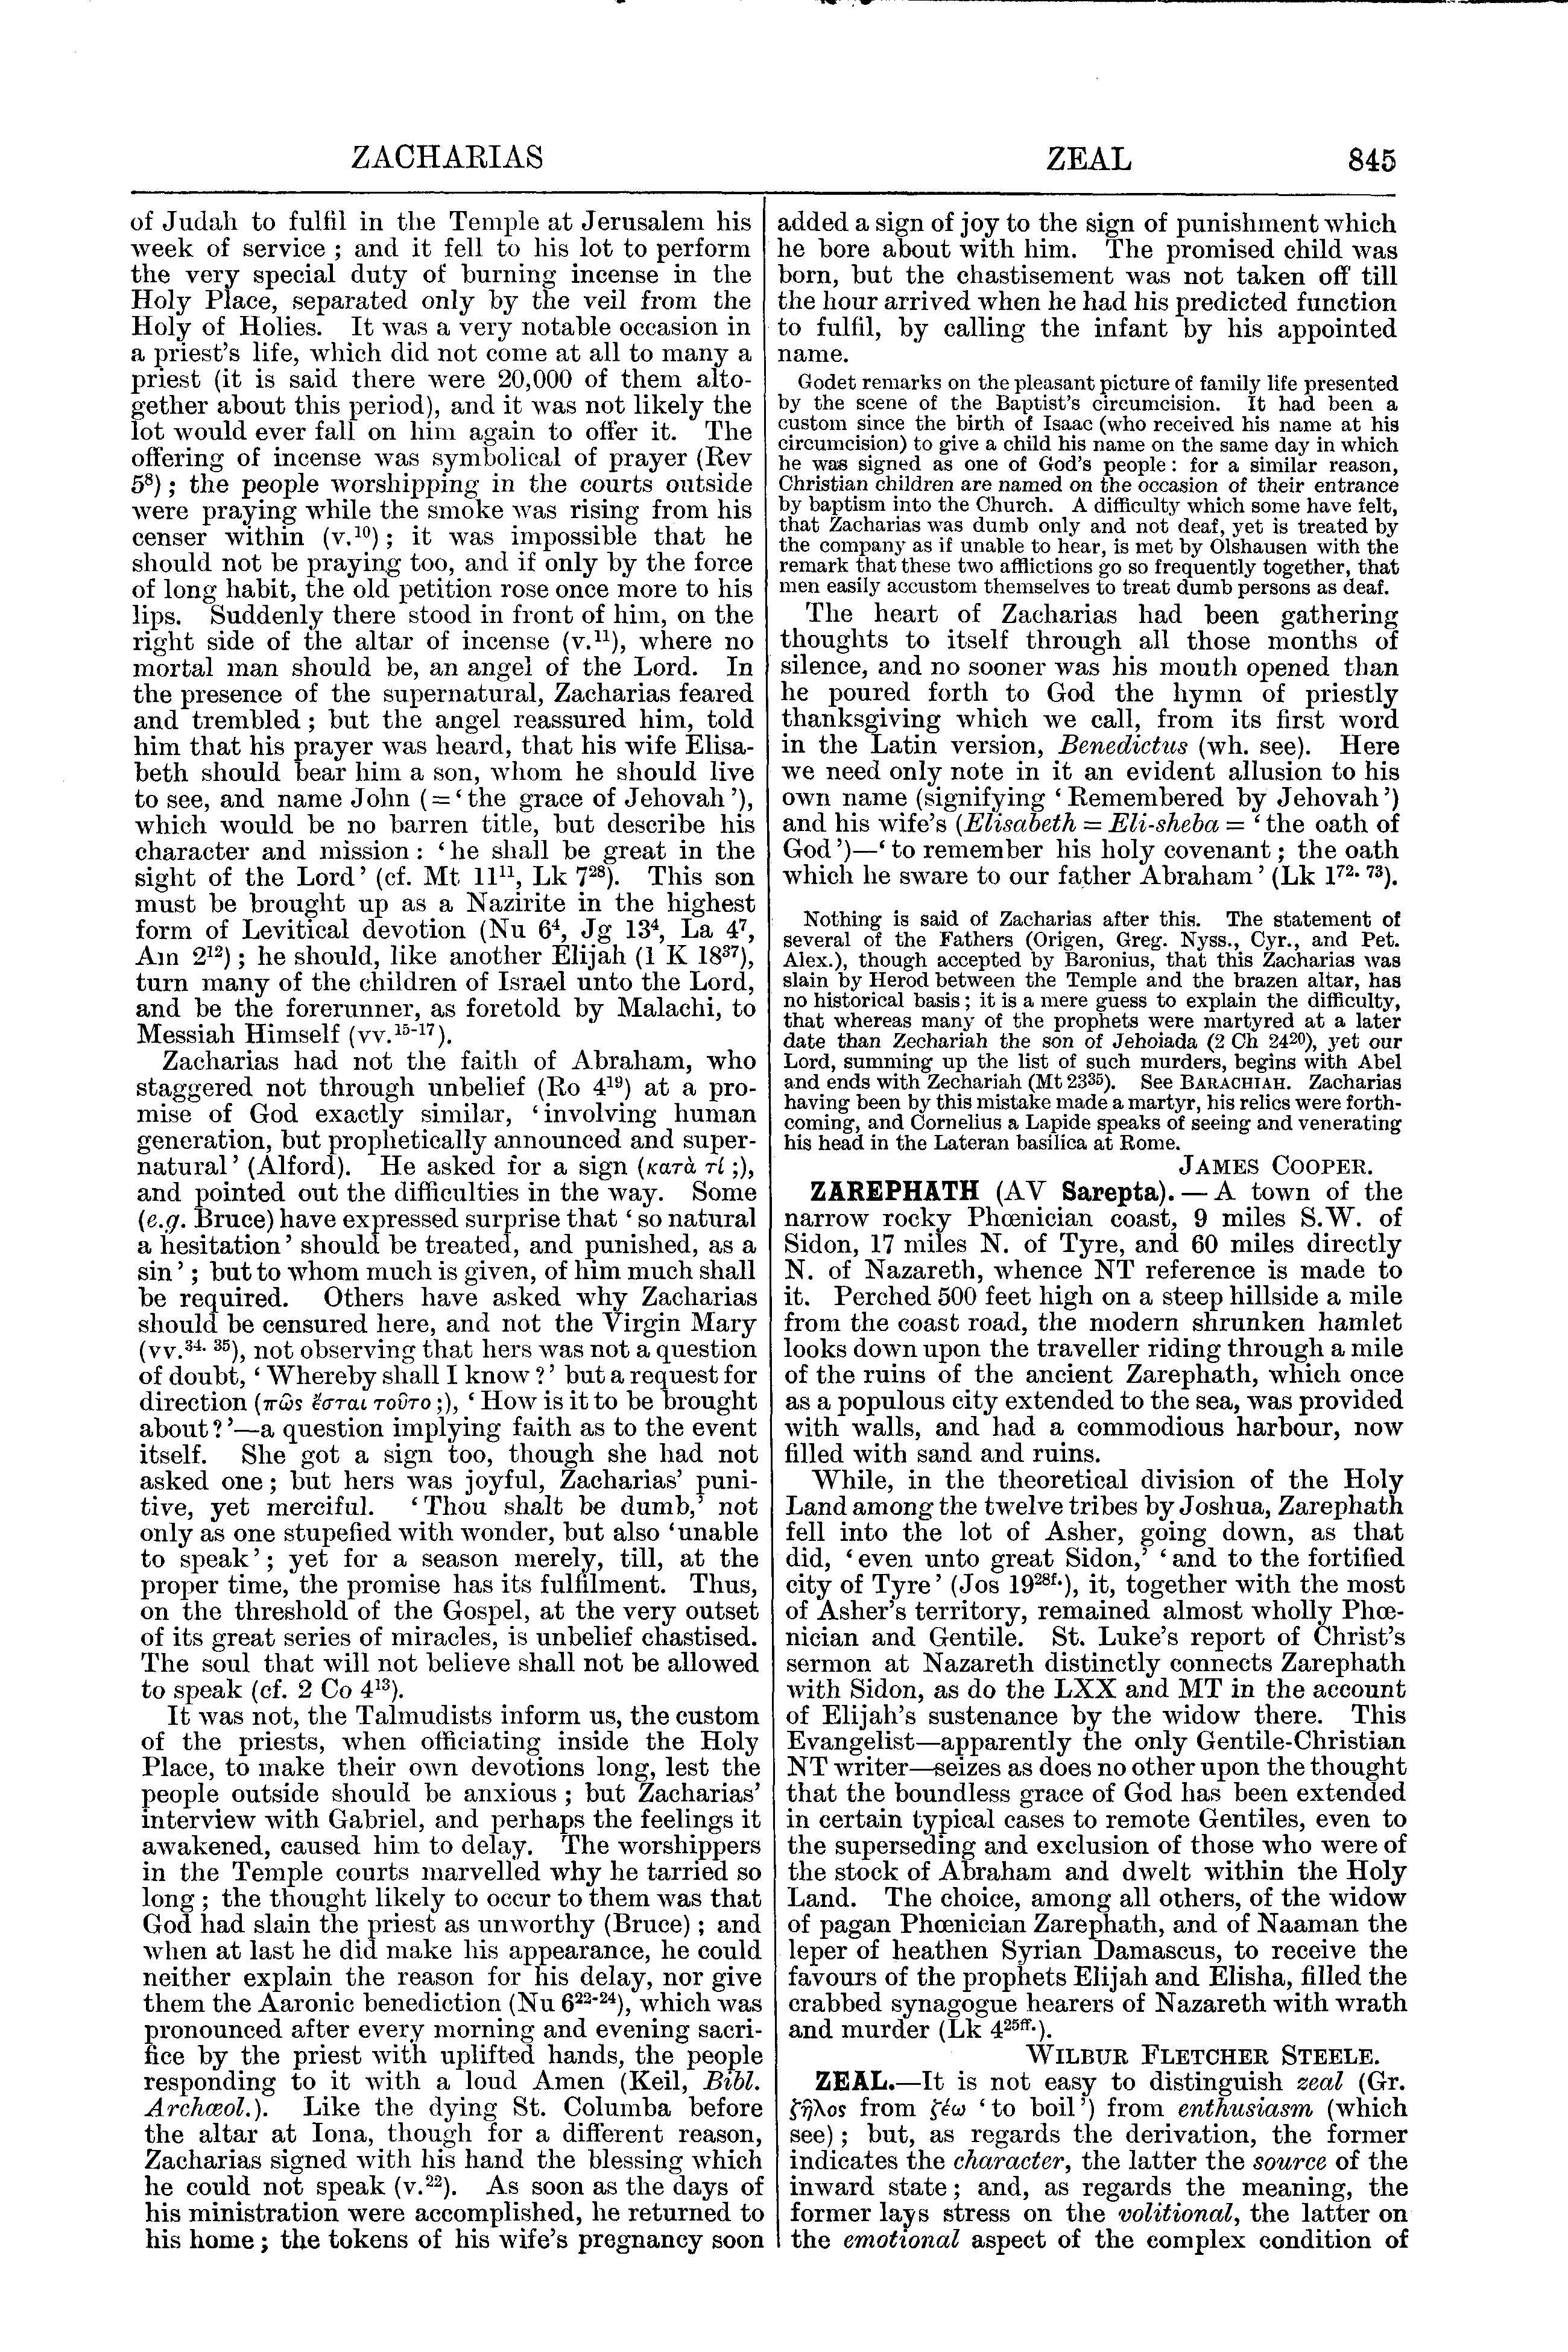 Image of page 845